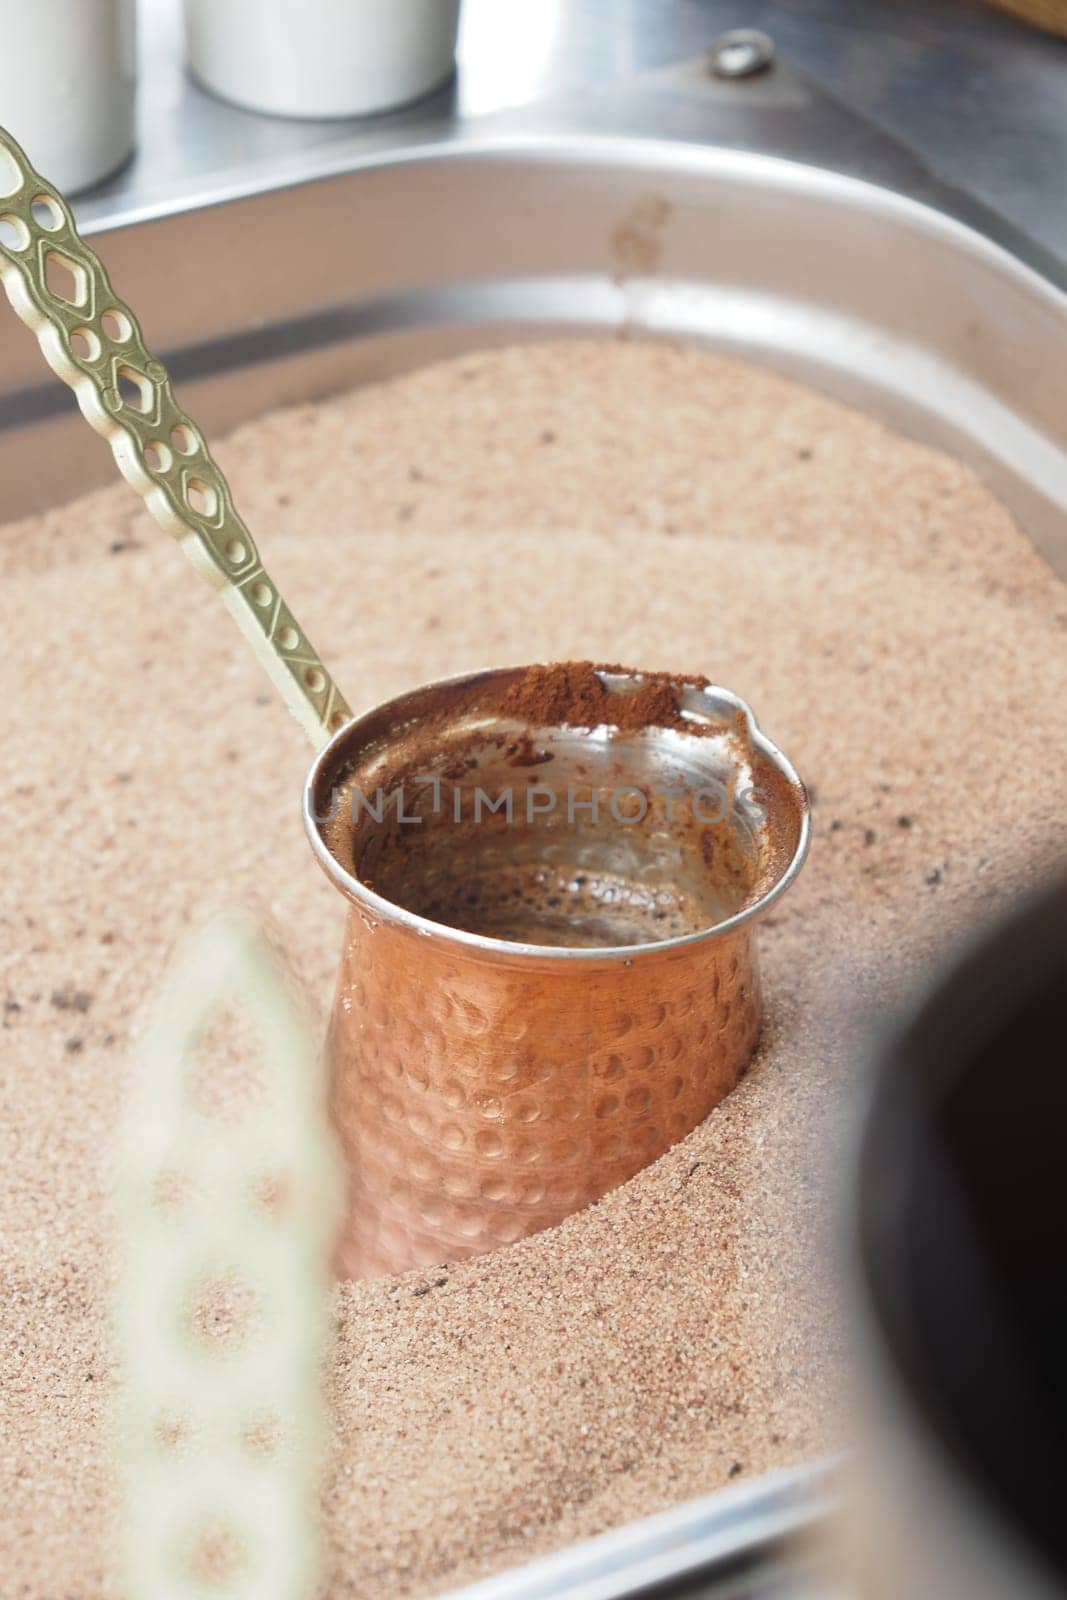 top view of making traditional turkish coffee on sand